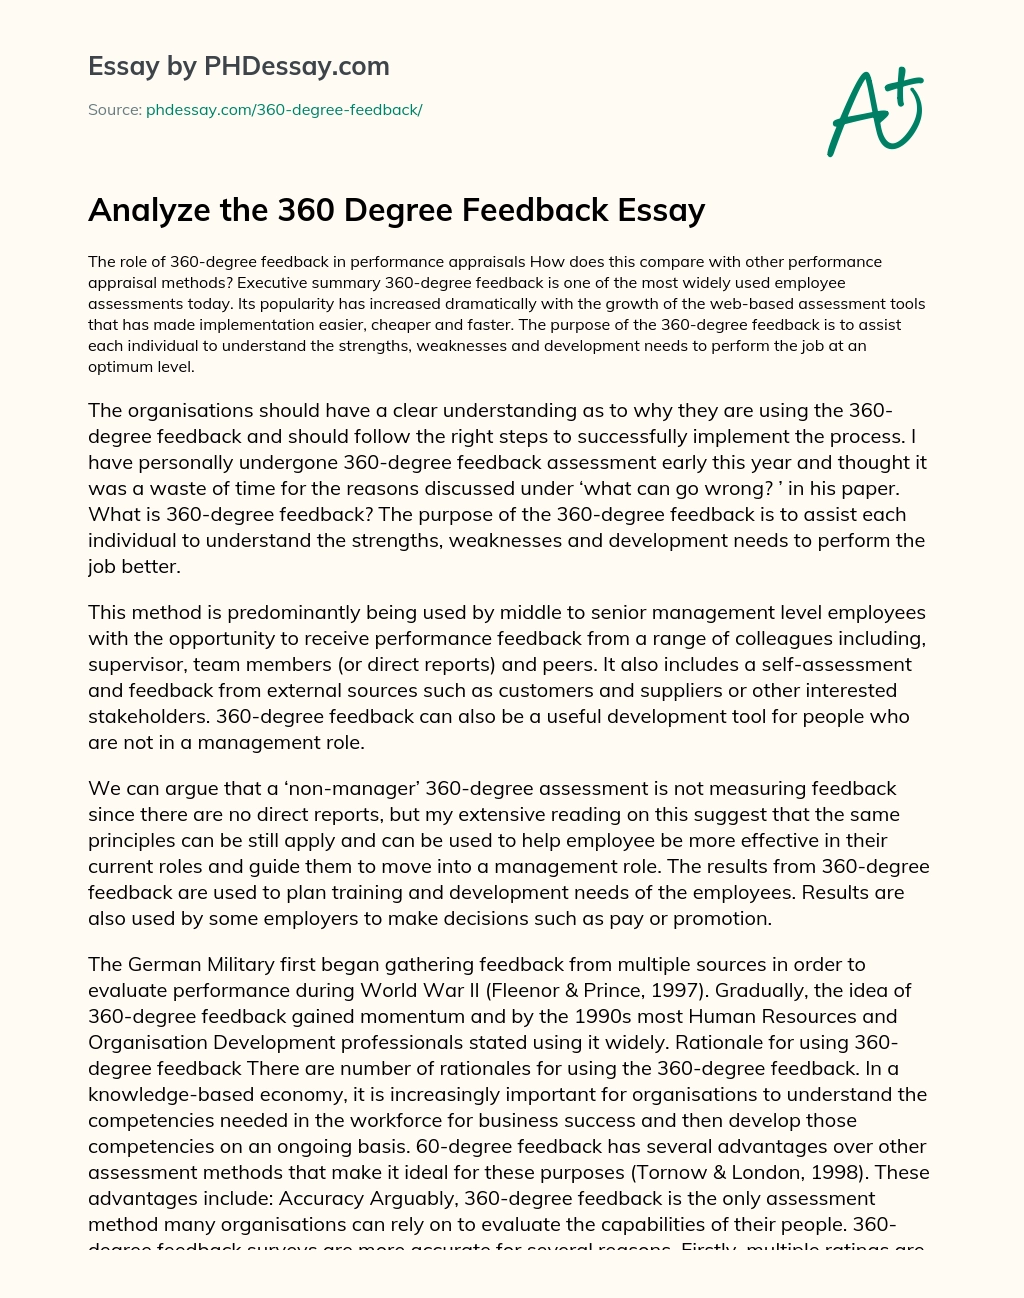 The Role of 360-Degree Feedback in Performance Appraisals: A Comparison with Other Methods essay